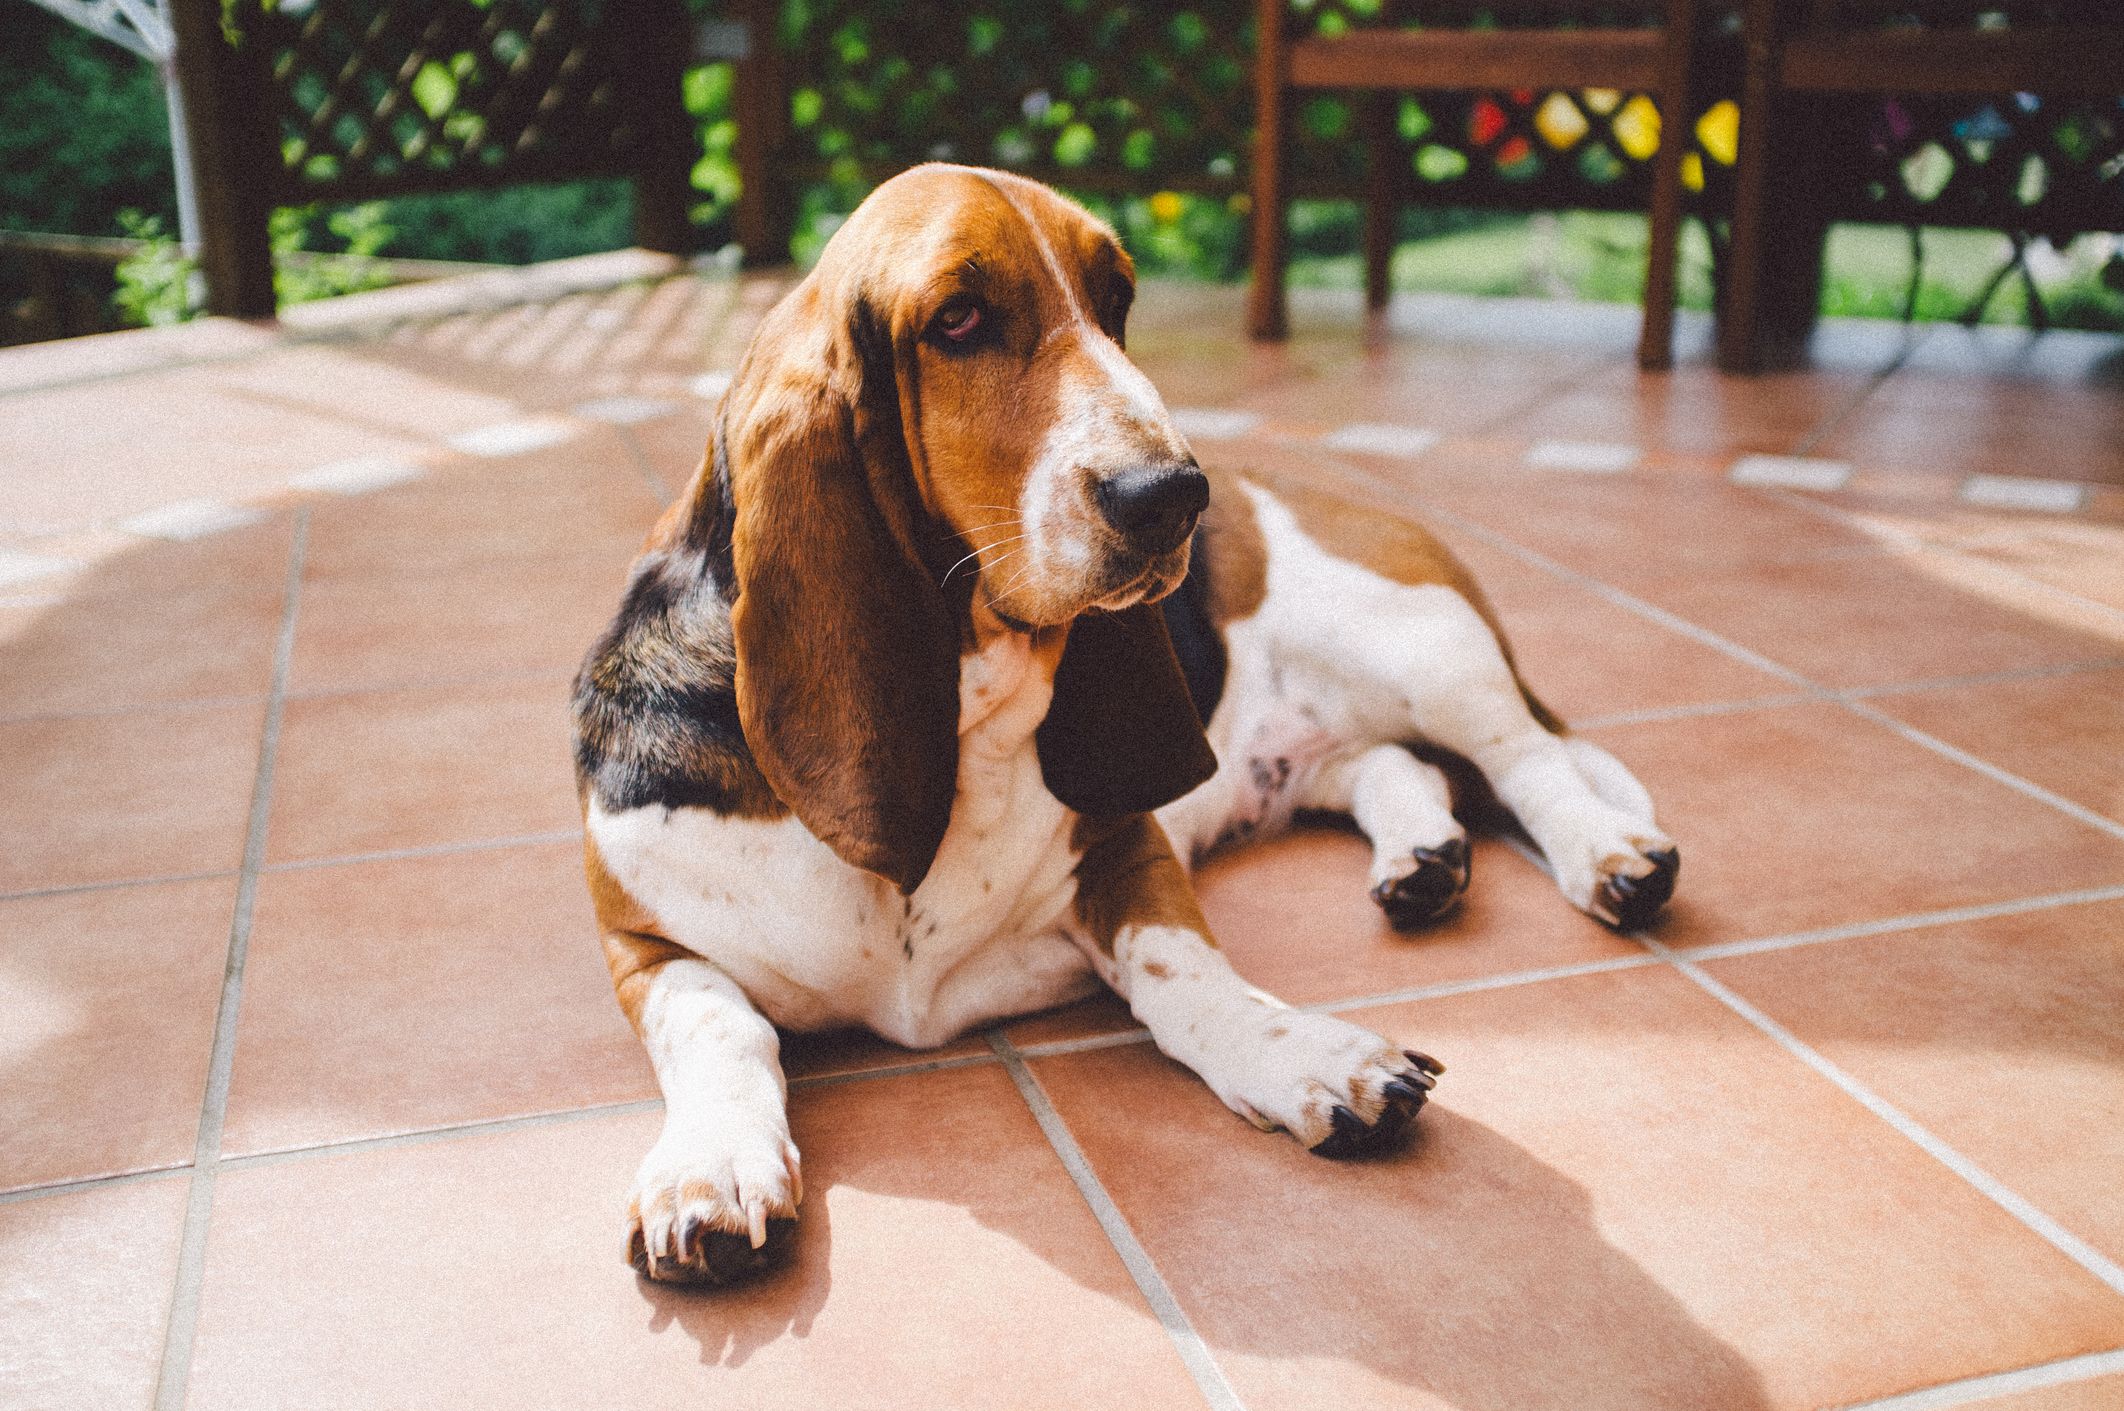 different types of basset hounds